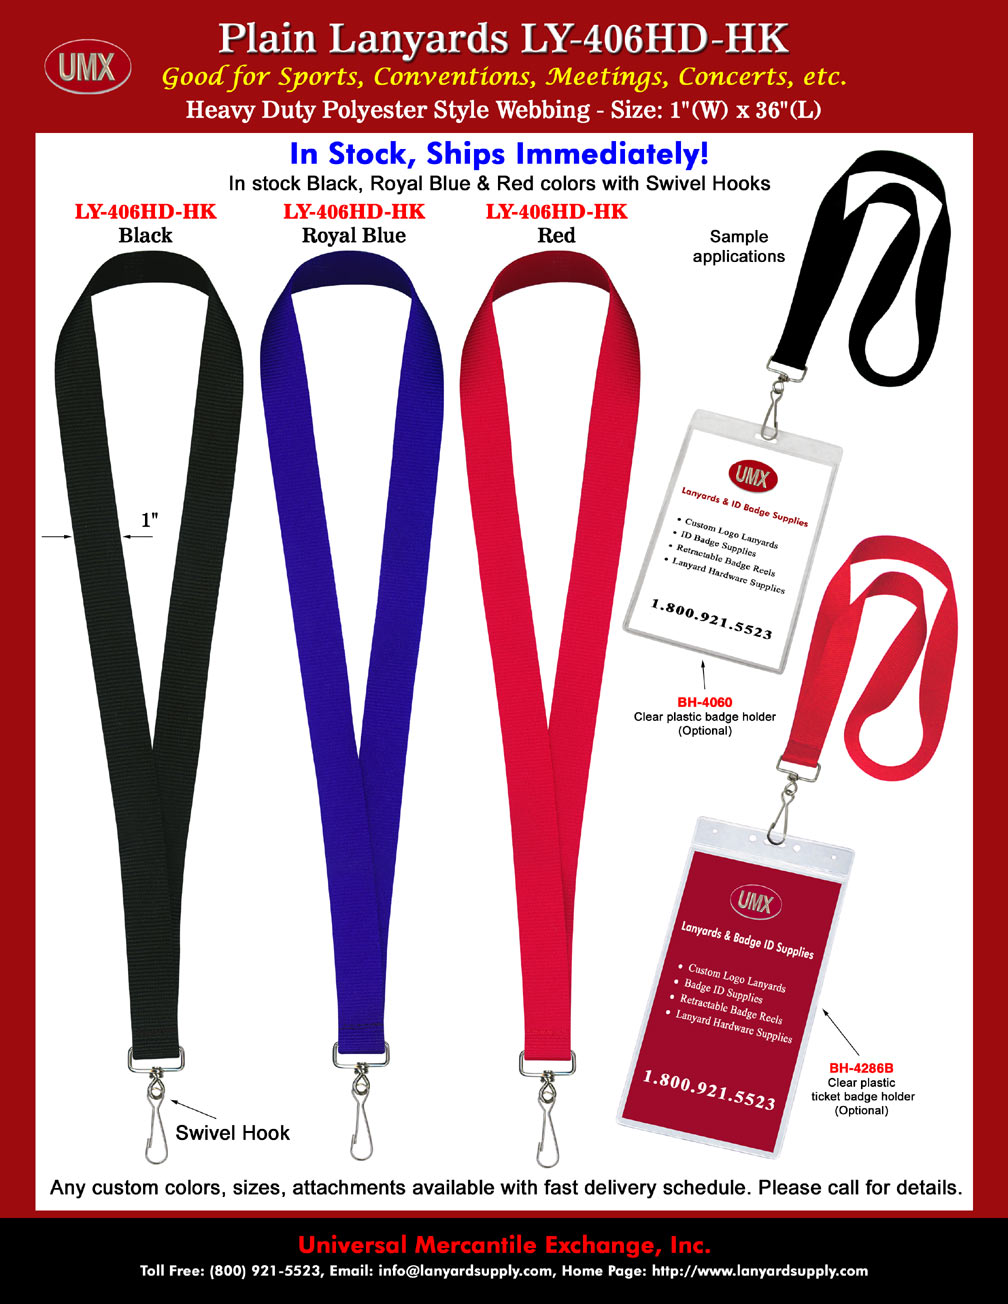 1" Big, Thick, Economic and Non-Printed Lanyards - For Sporting Ticket, Event Pin or ID Name Badge Holders